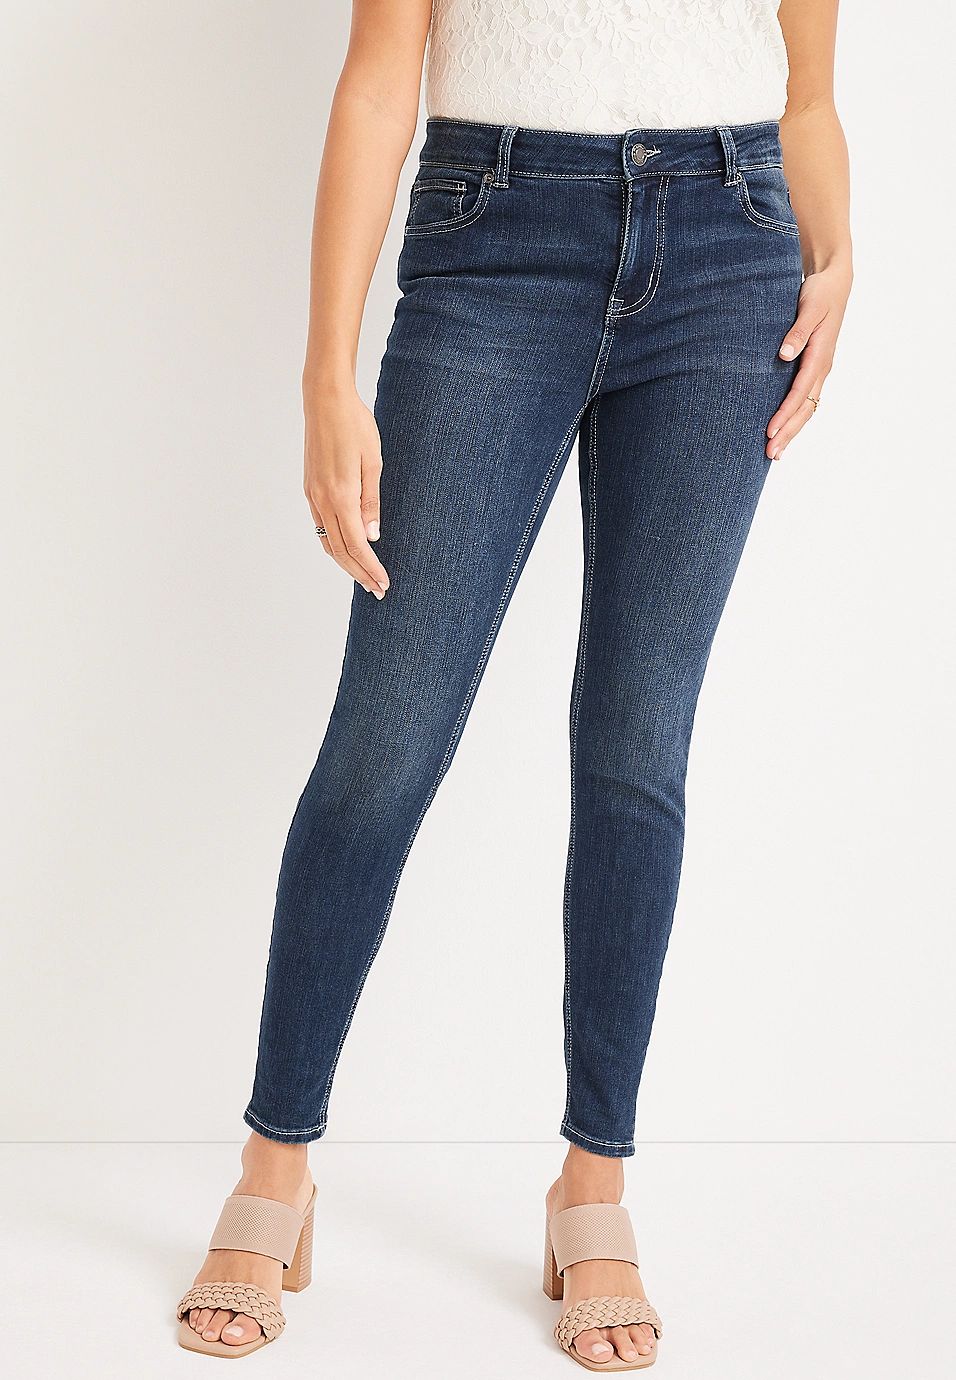 m jeans by maurices™ Classic Skinny Mid Fit Mid Rise Jean | Maurices